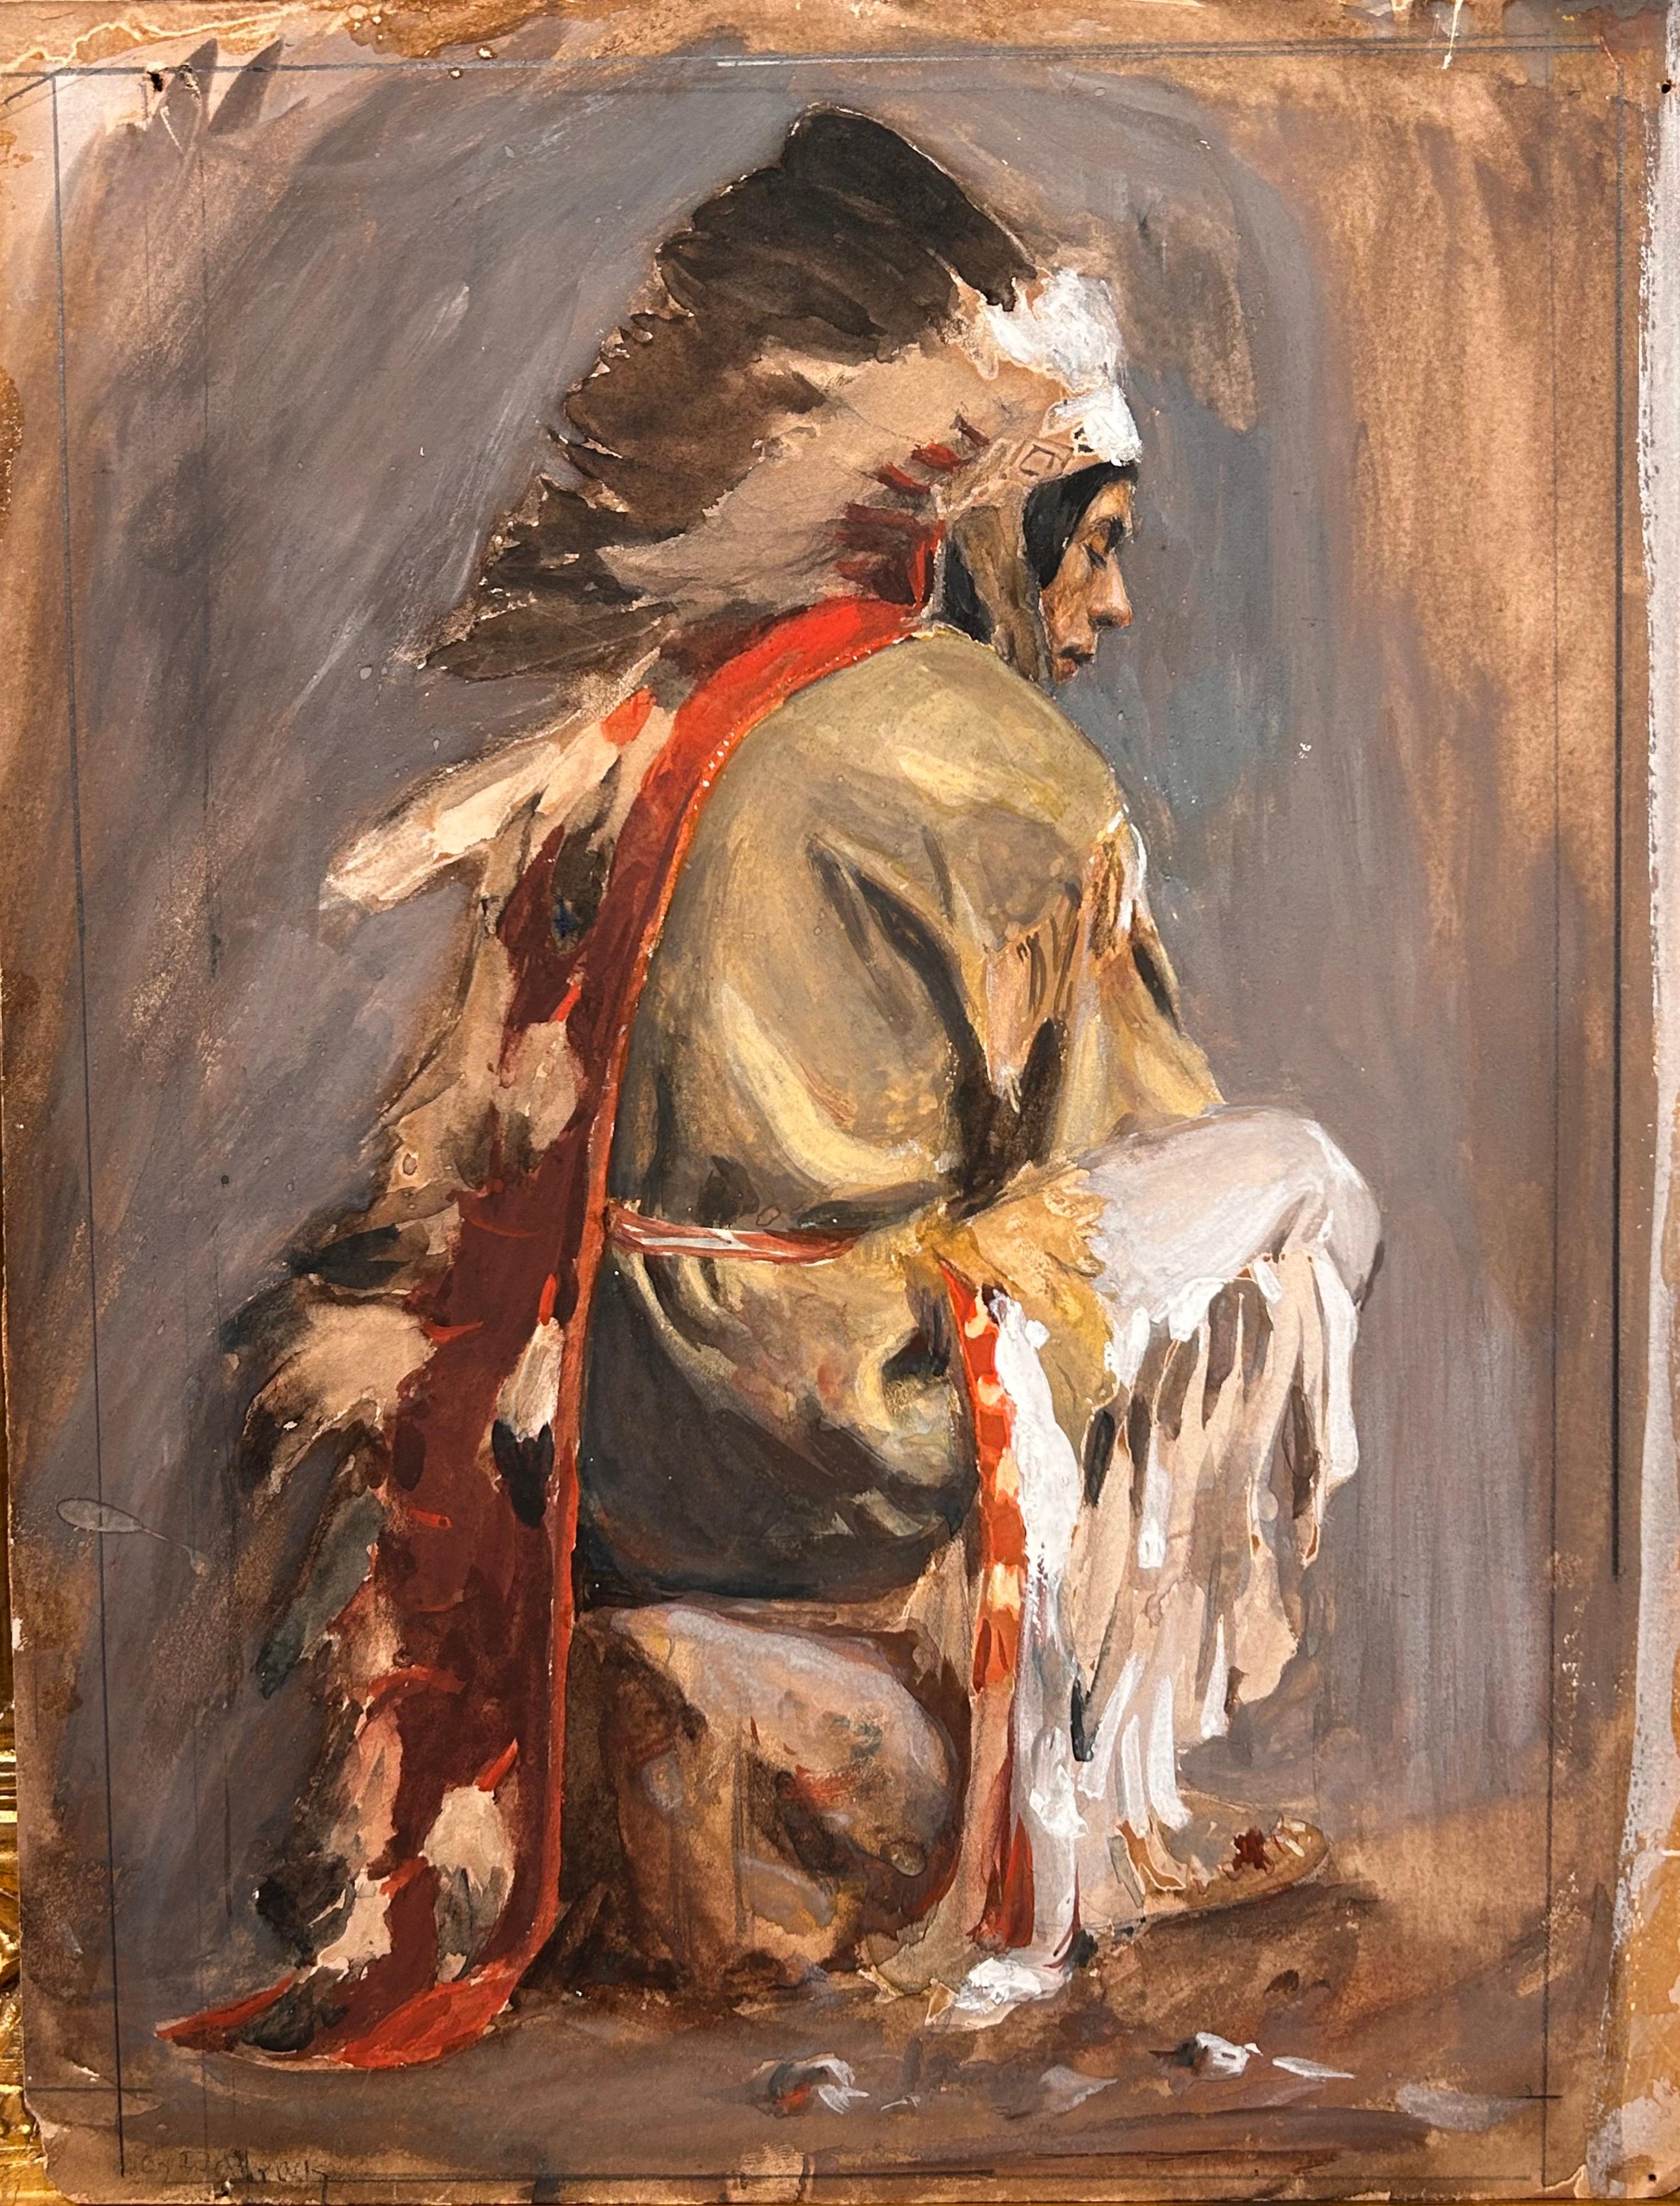 Portrait of Native American Man in Traditional Clothing - Painting by George de Forest Brush 